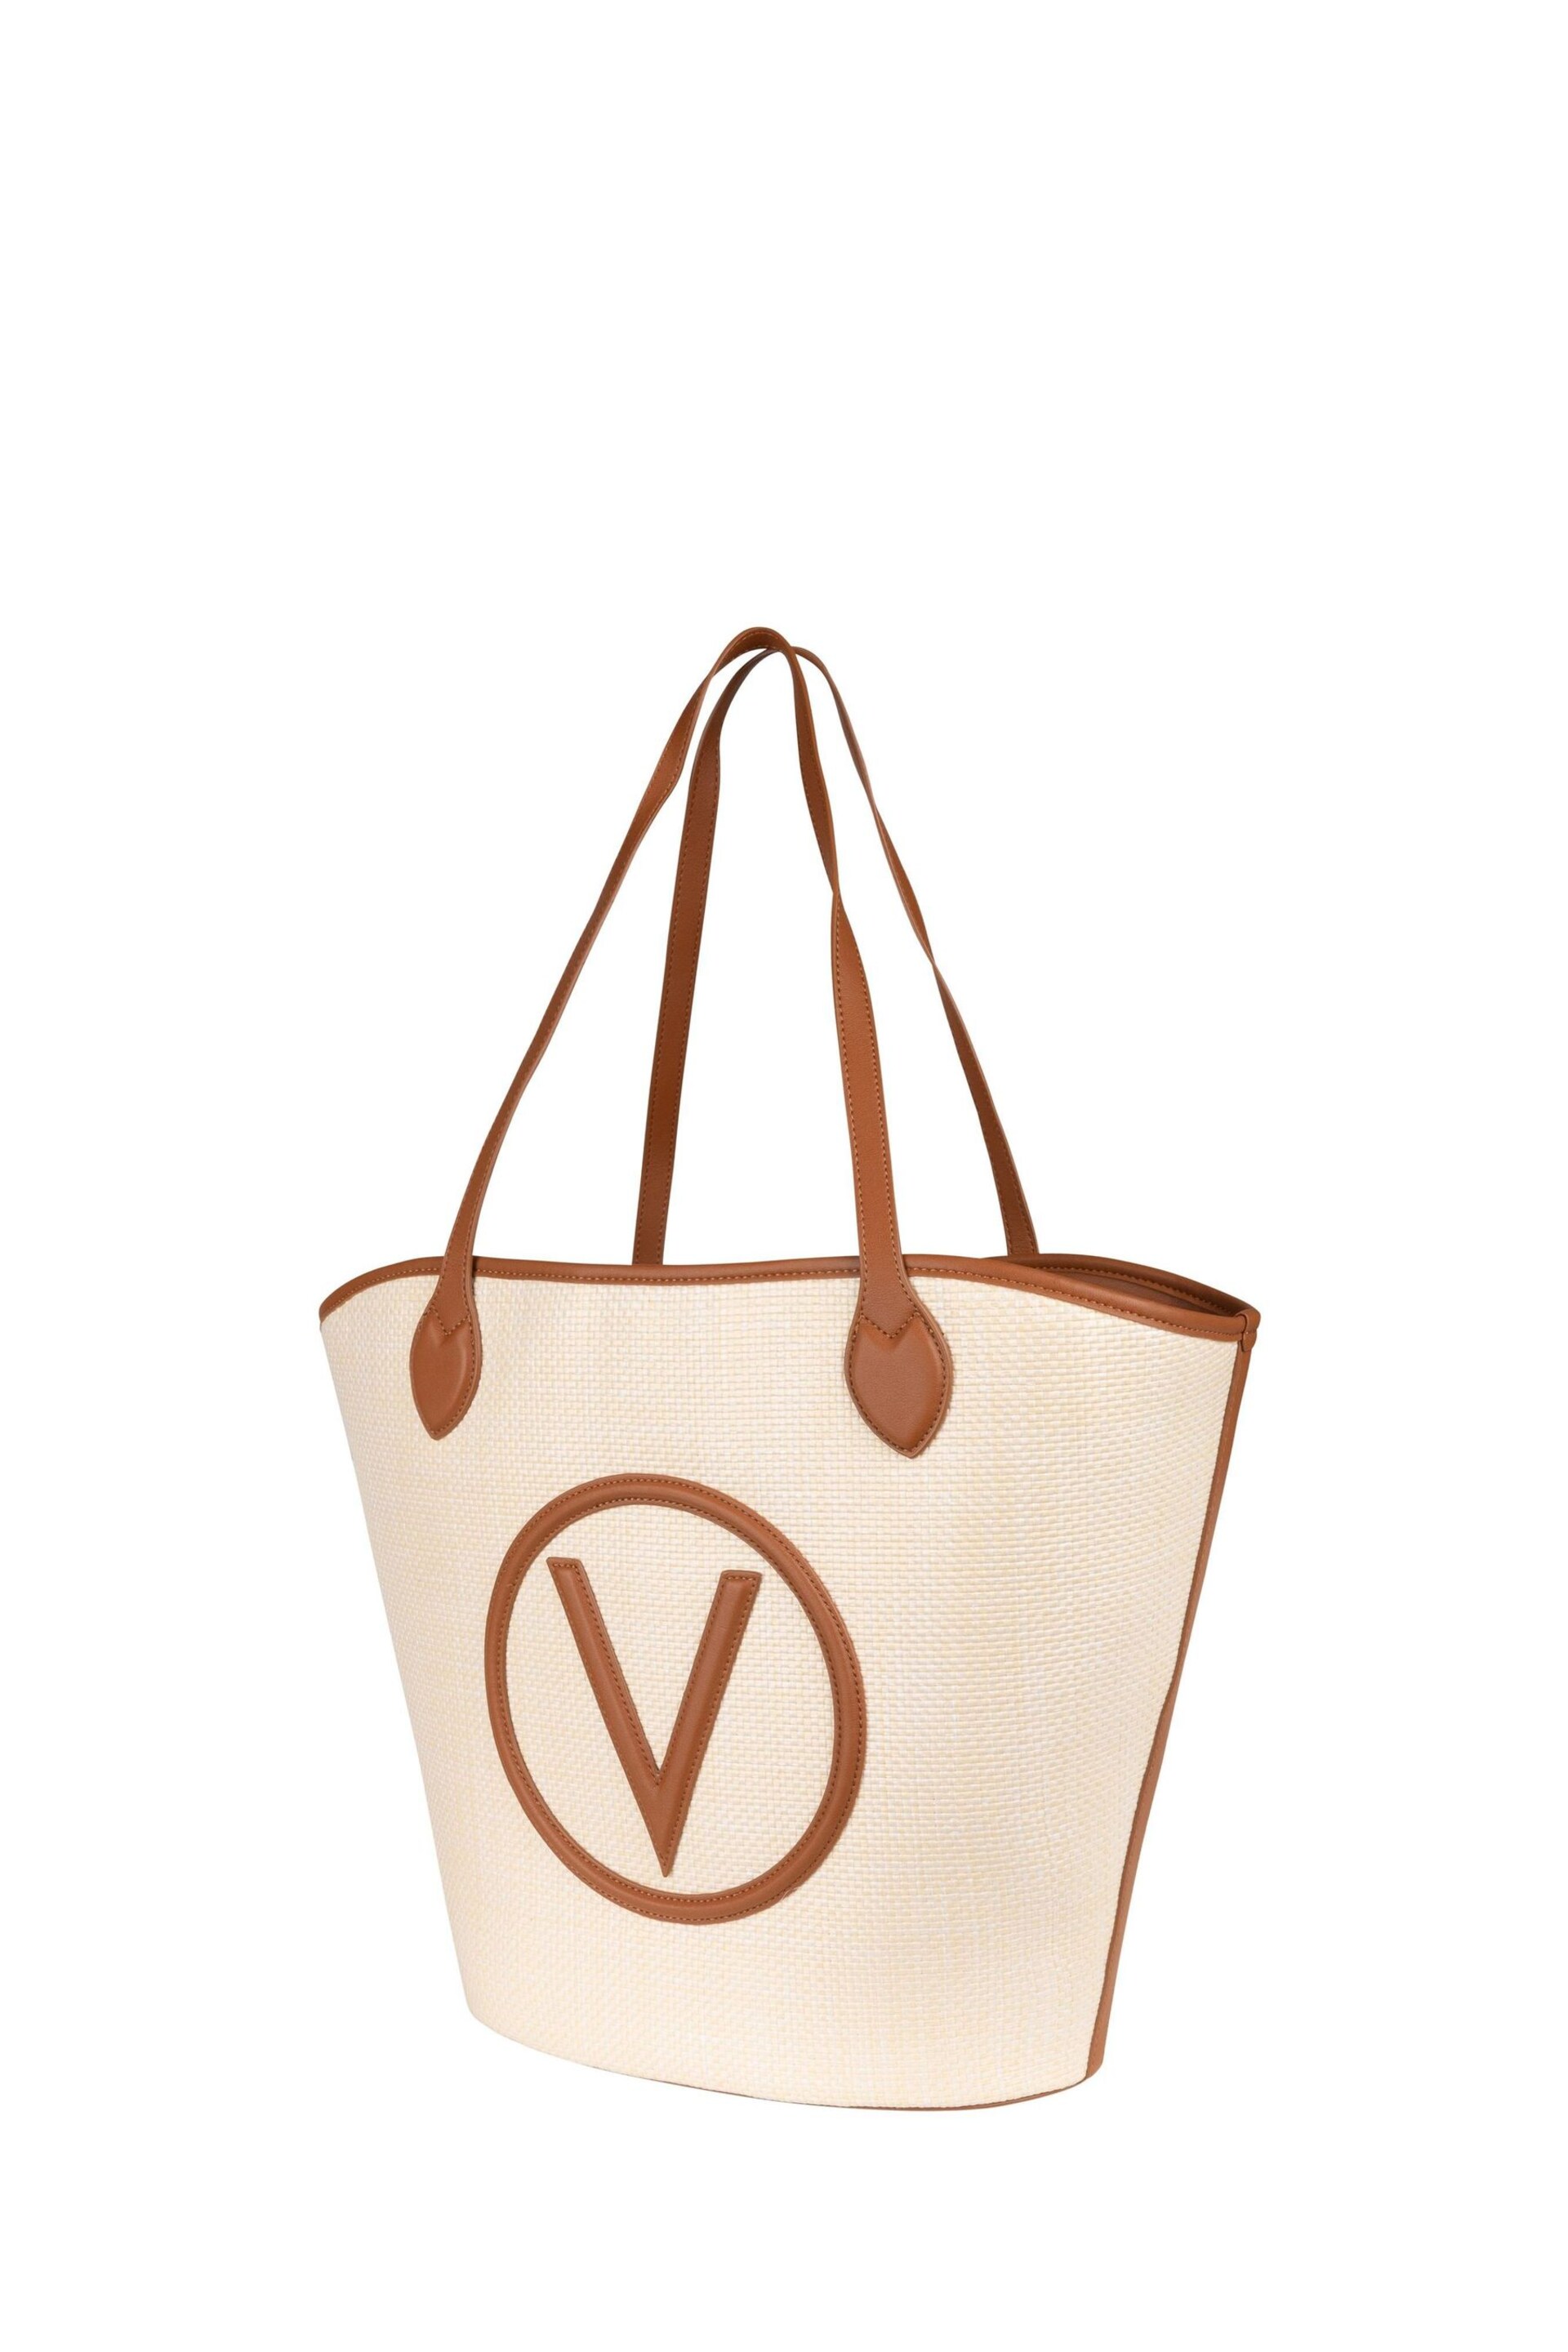 Valentino Bags Brown Covent Canvas Tote Bag With Removable Crossbody Bag - Image 2 of 5